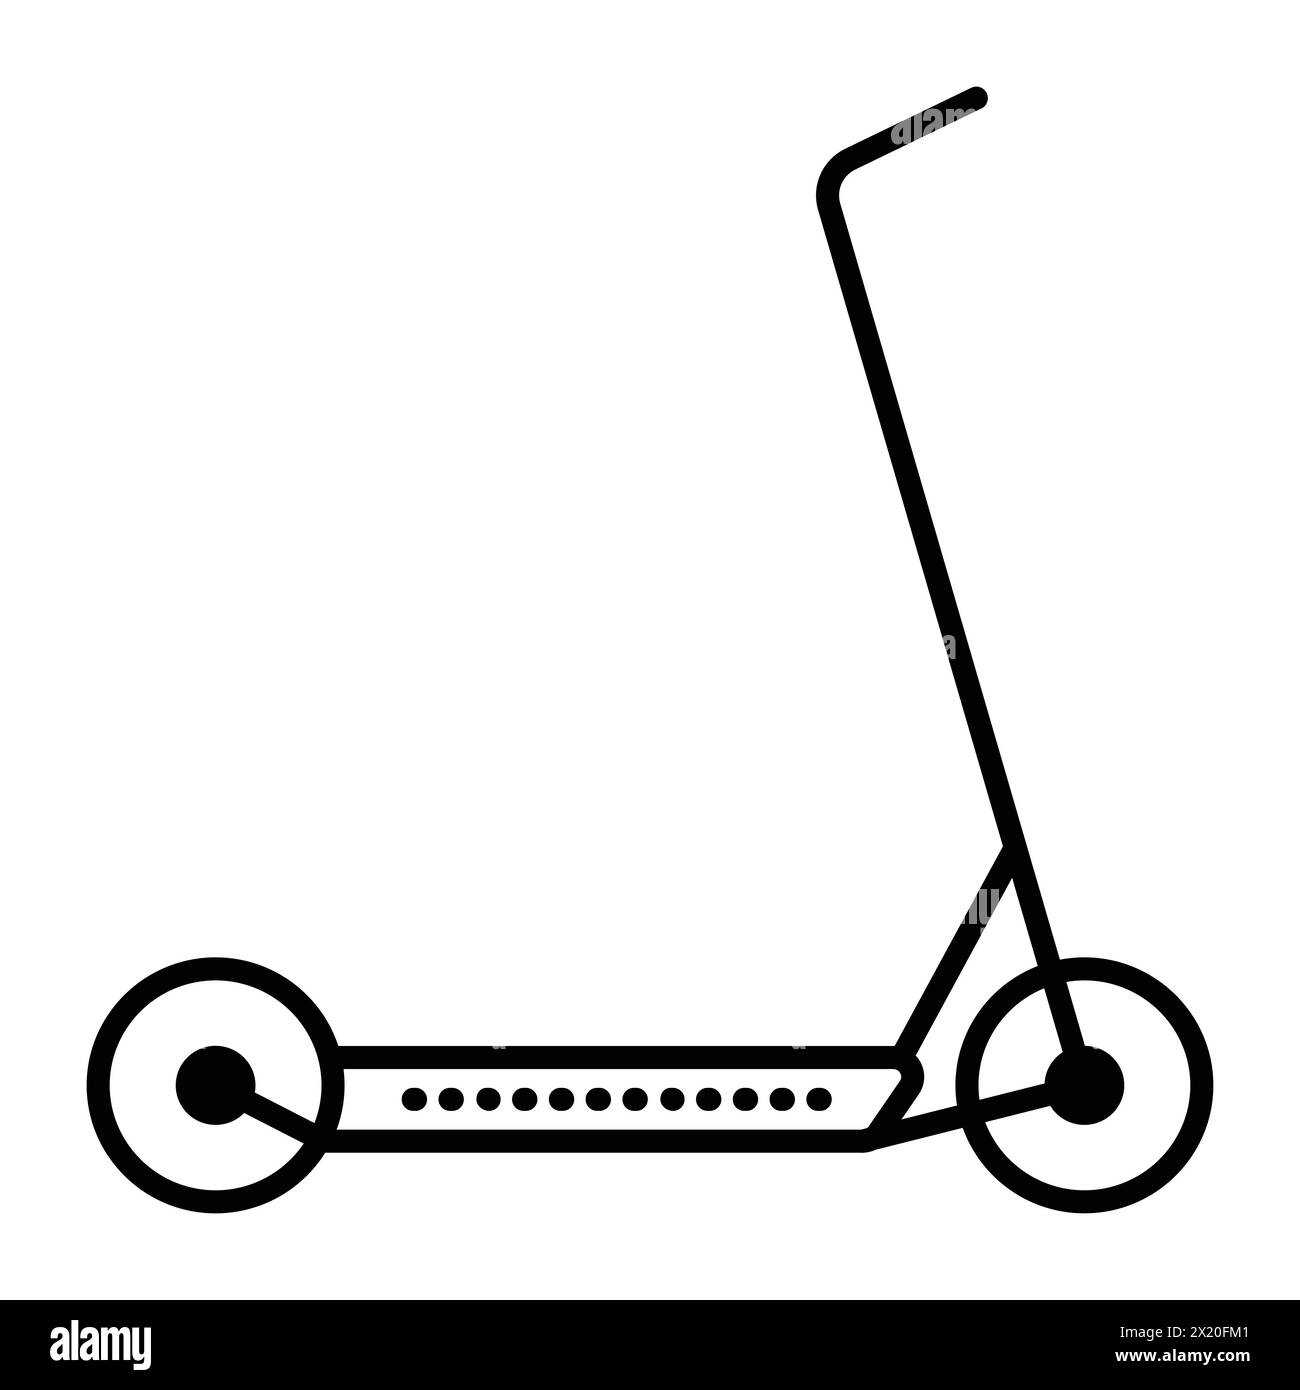 Electric scooter black line vector icon, modern mobile transport, side view pictogram, two-wheeled vehicle Stock Vector